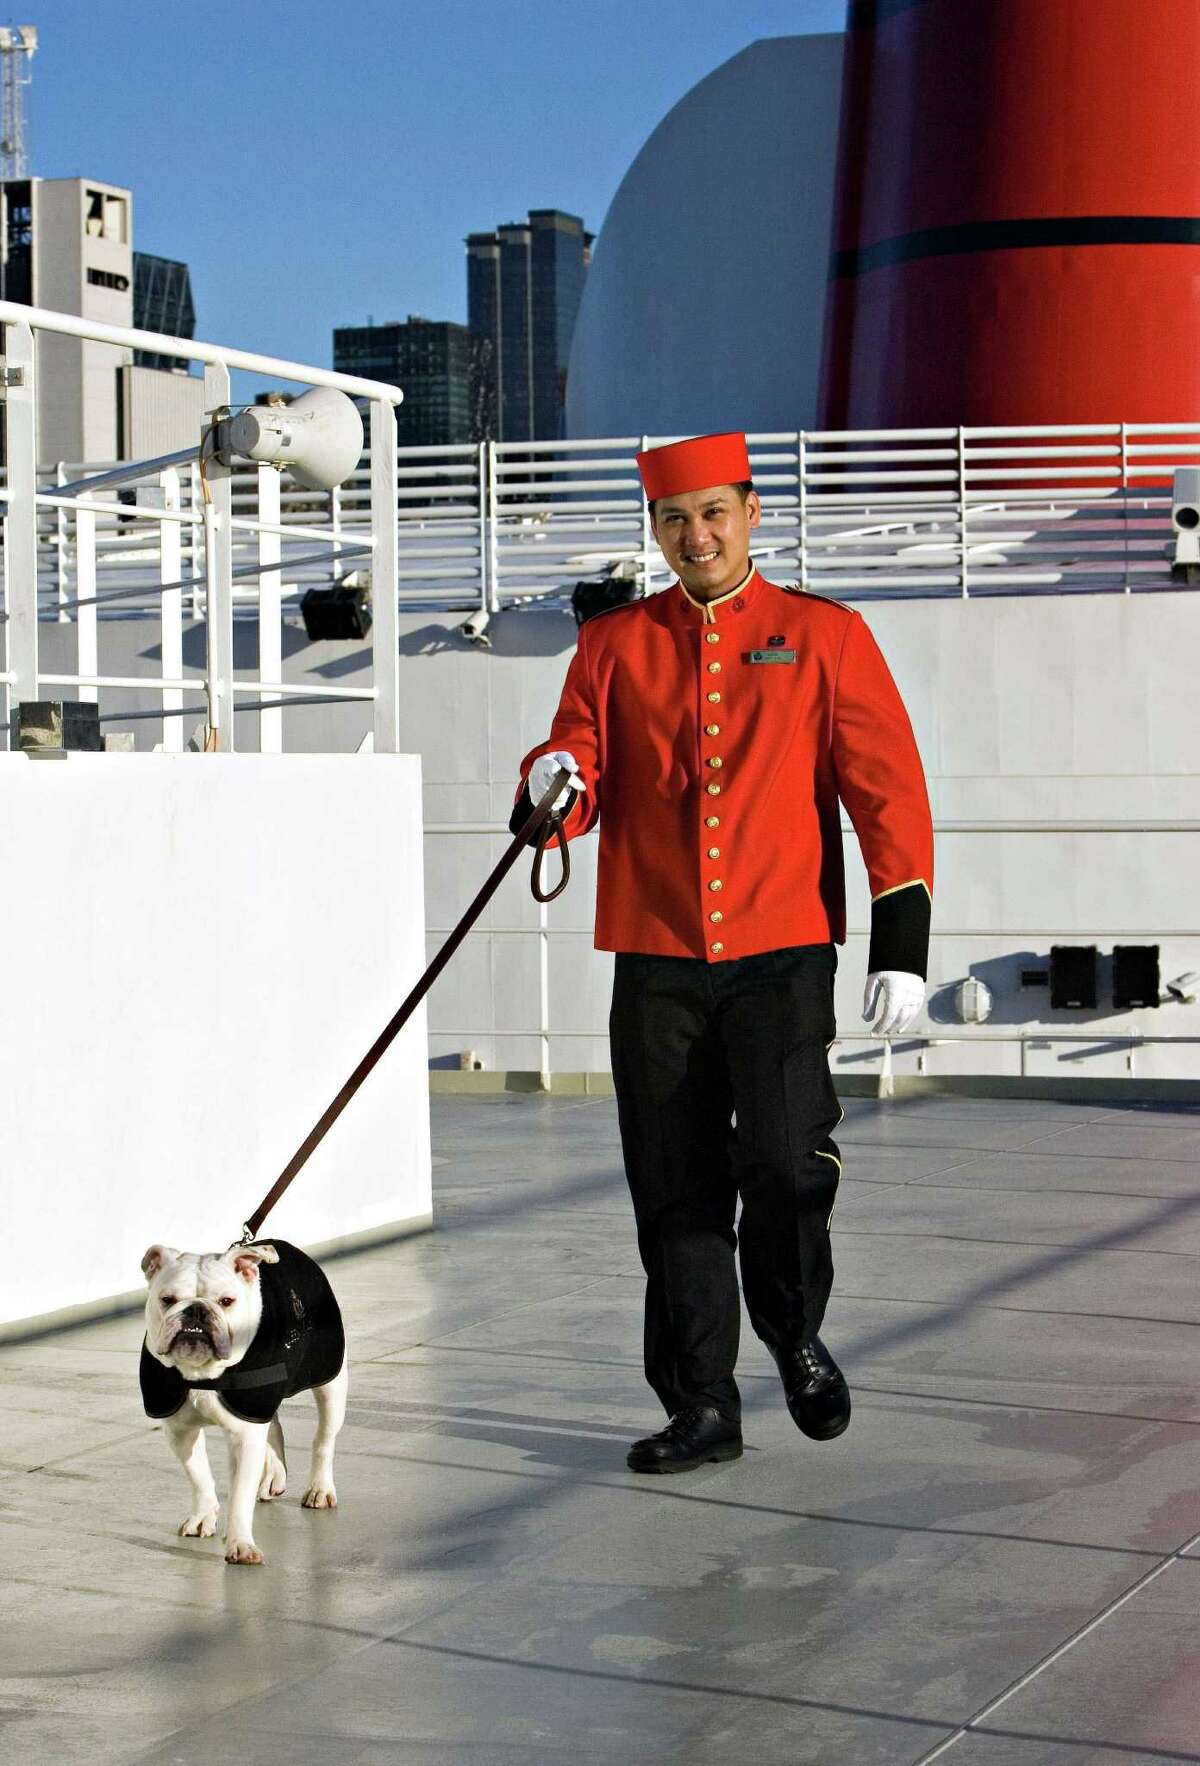 This undated photo from Cunard shows the cruise line's kennel master walking a dog on the top deck of the Queen Mary 2. The ship is going into drydock later this year for a renovation that will add family staterooms and rooms for solo travelers, as well as adding kennel space for canine passengers. (Cunard via AP) ORG XMIT: MER2016011410463460